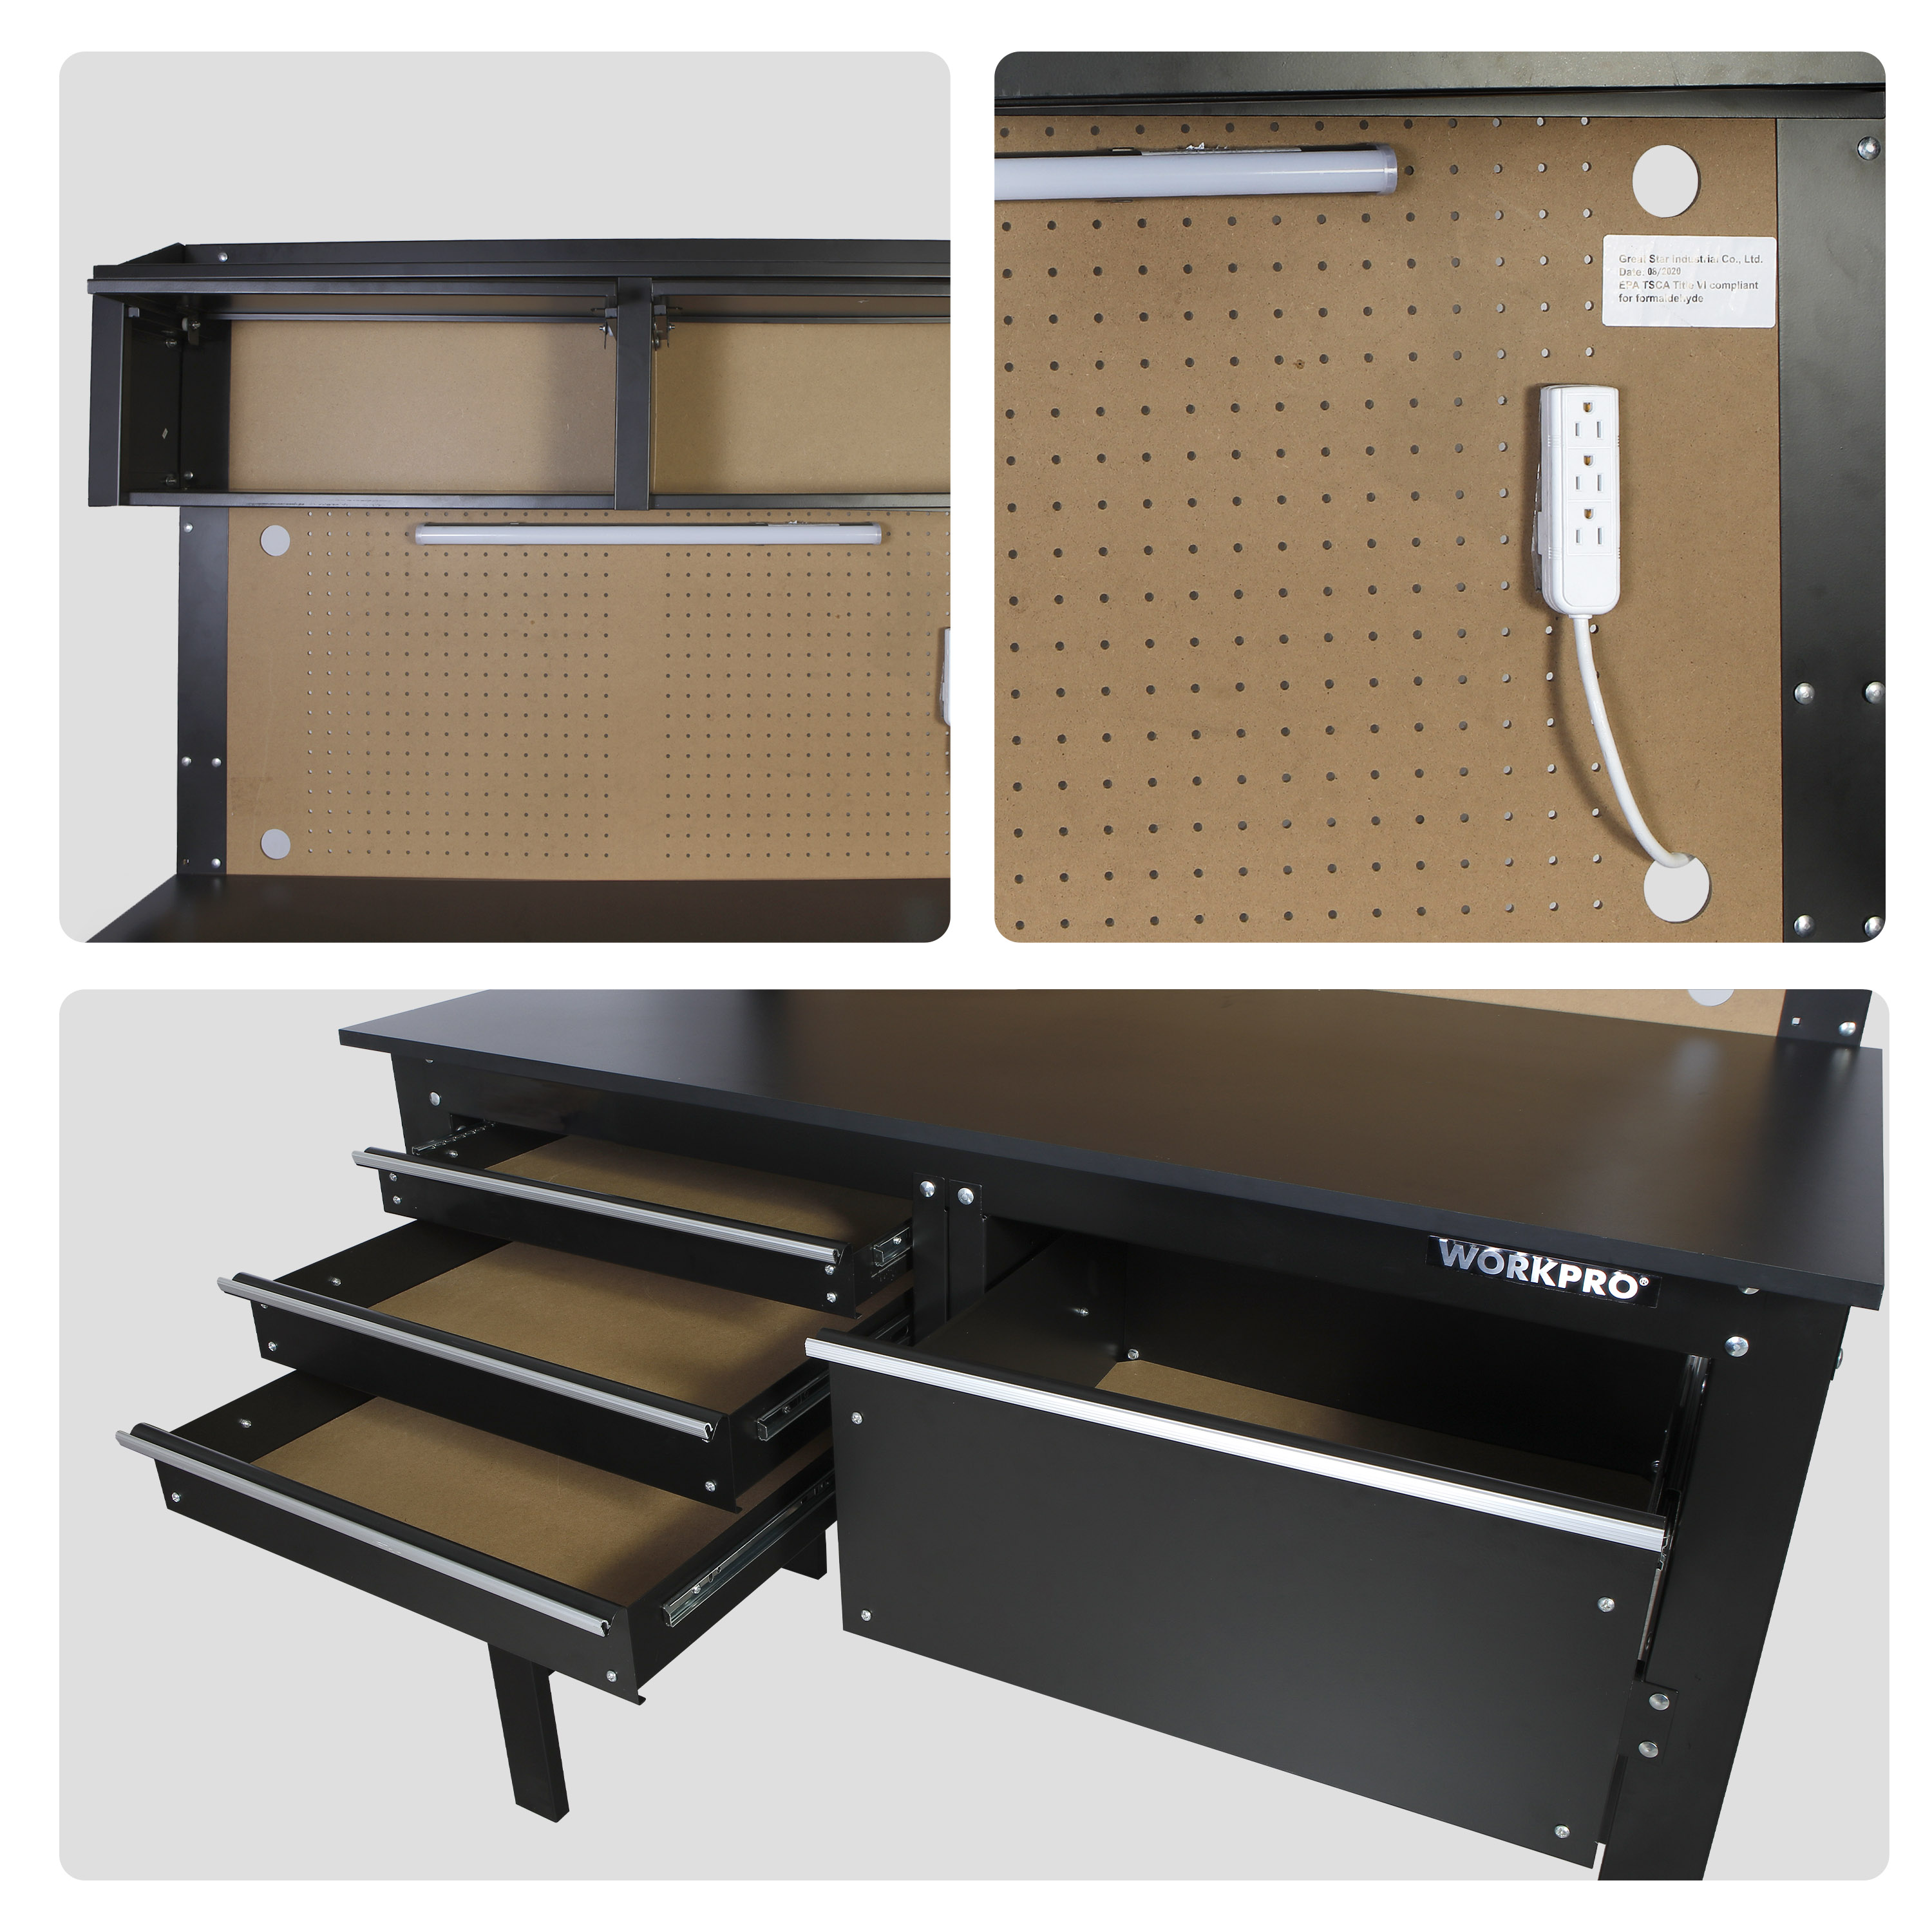 WORKPRO 2-in-1 48-inch Workbench and Cabinet Combo with Light, Steel, Wood - image 5 of 9